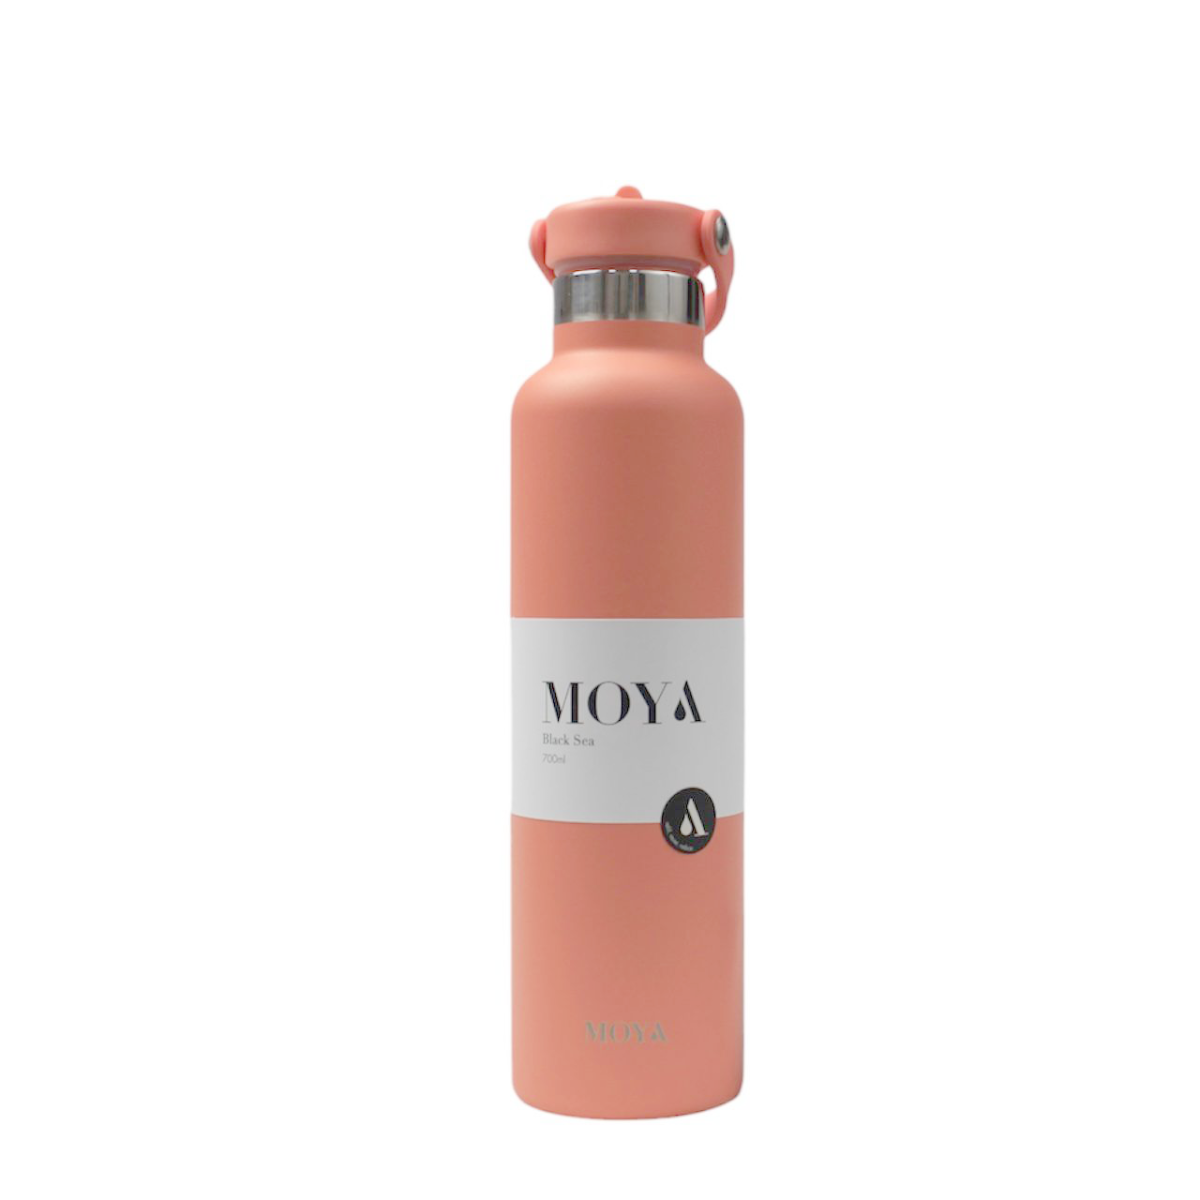 Moya "Black Sea" 700ml Insulated Sustainable Water Bottle Coral